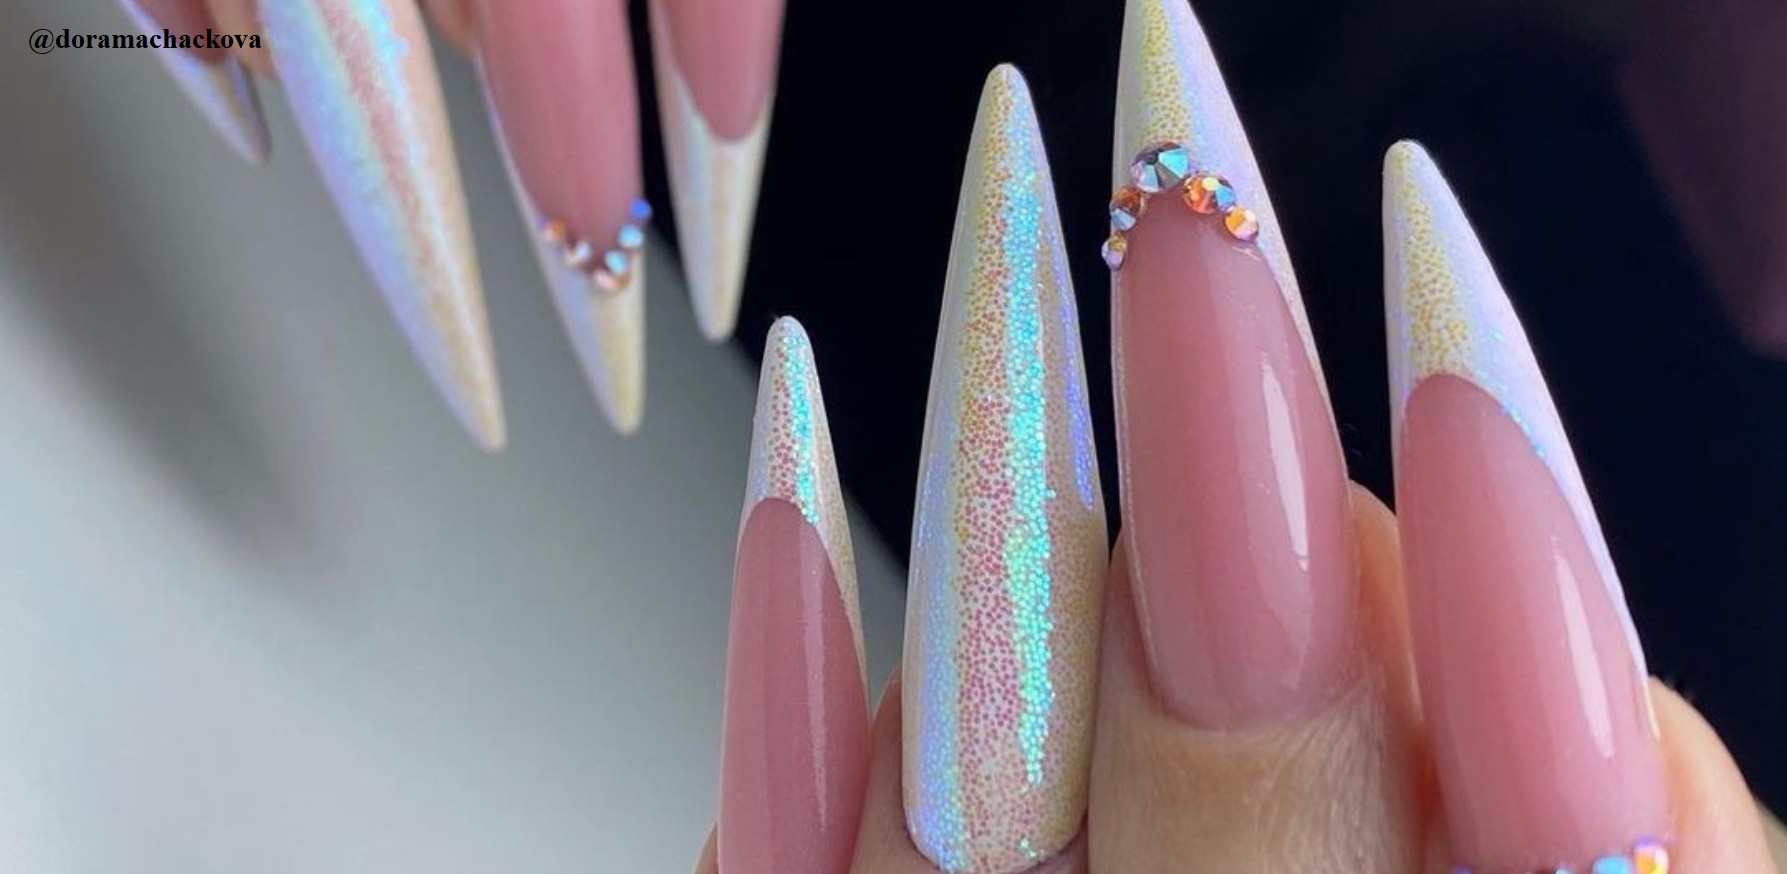 Try These Holiday French Manicure Designs To Slay Your Party Looks